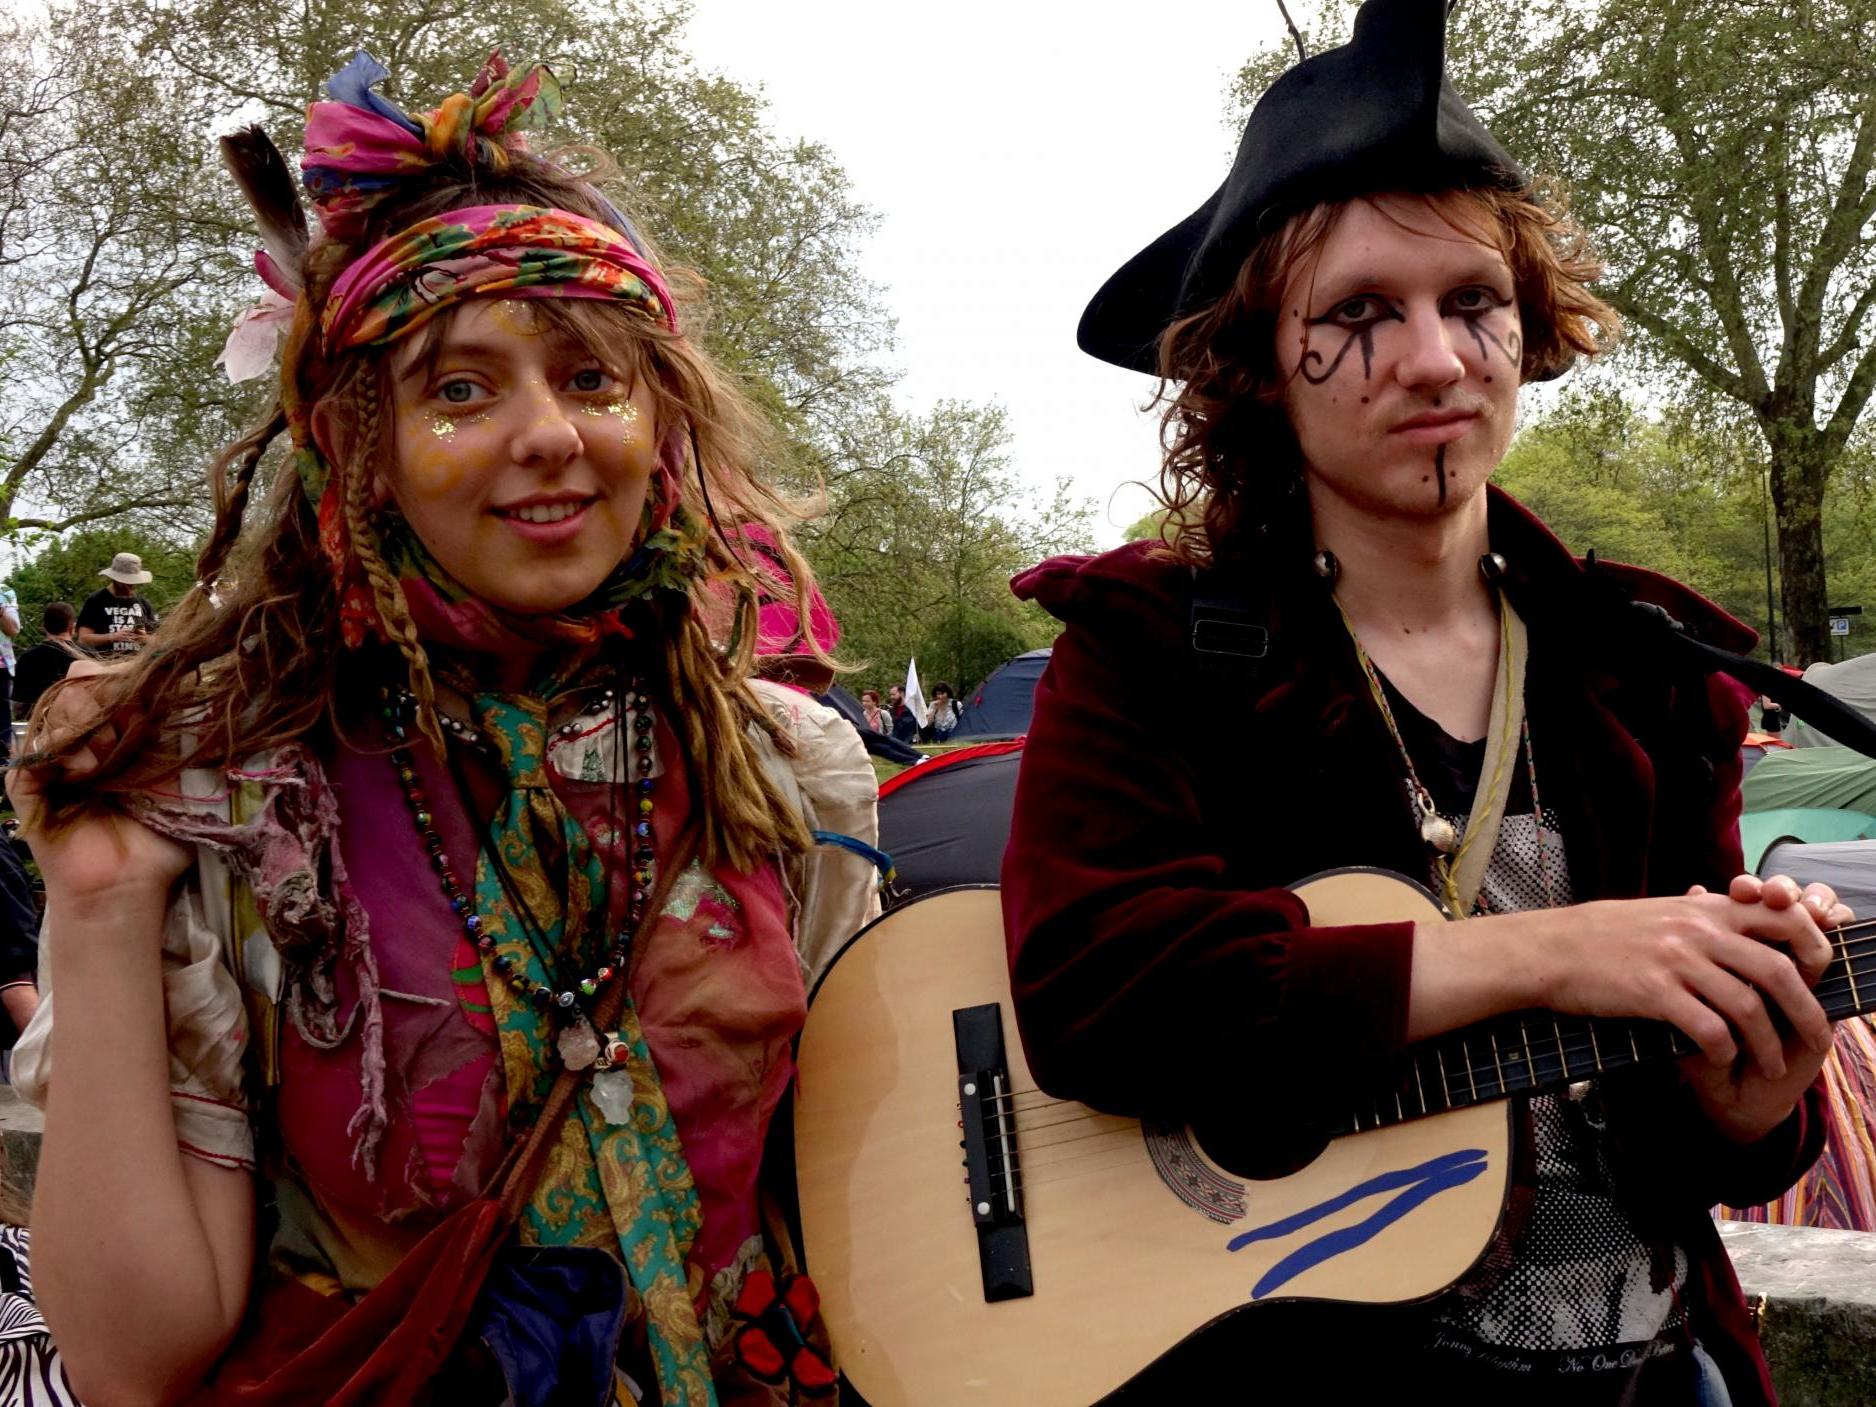 Extinction Rebellion: Supporters warn 'hippy language' is watering down climate change message